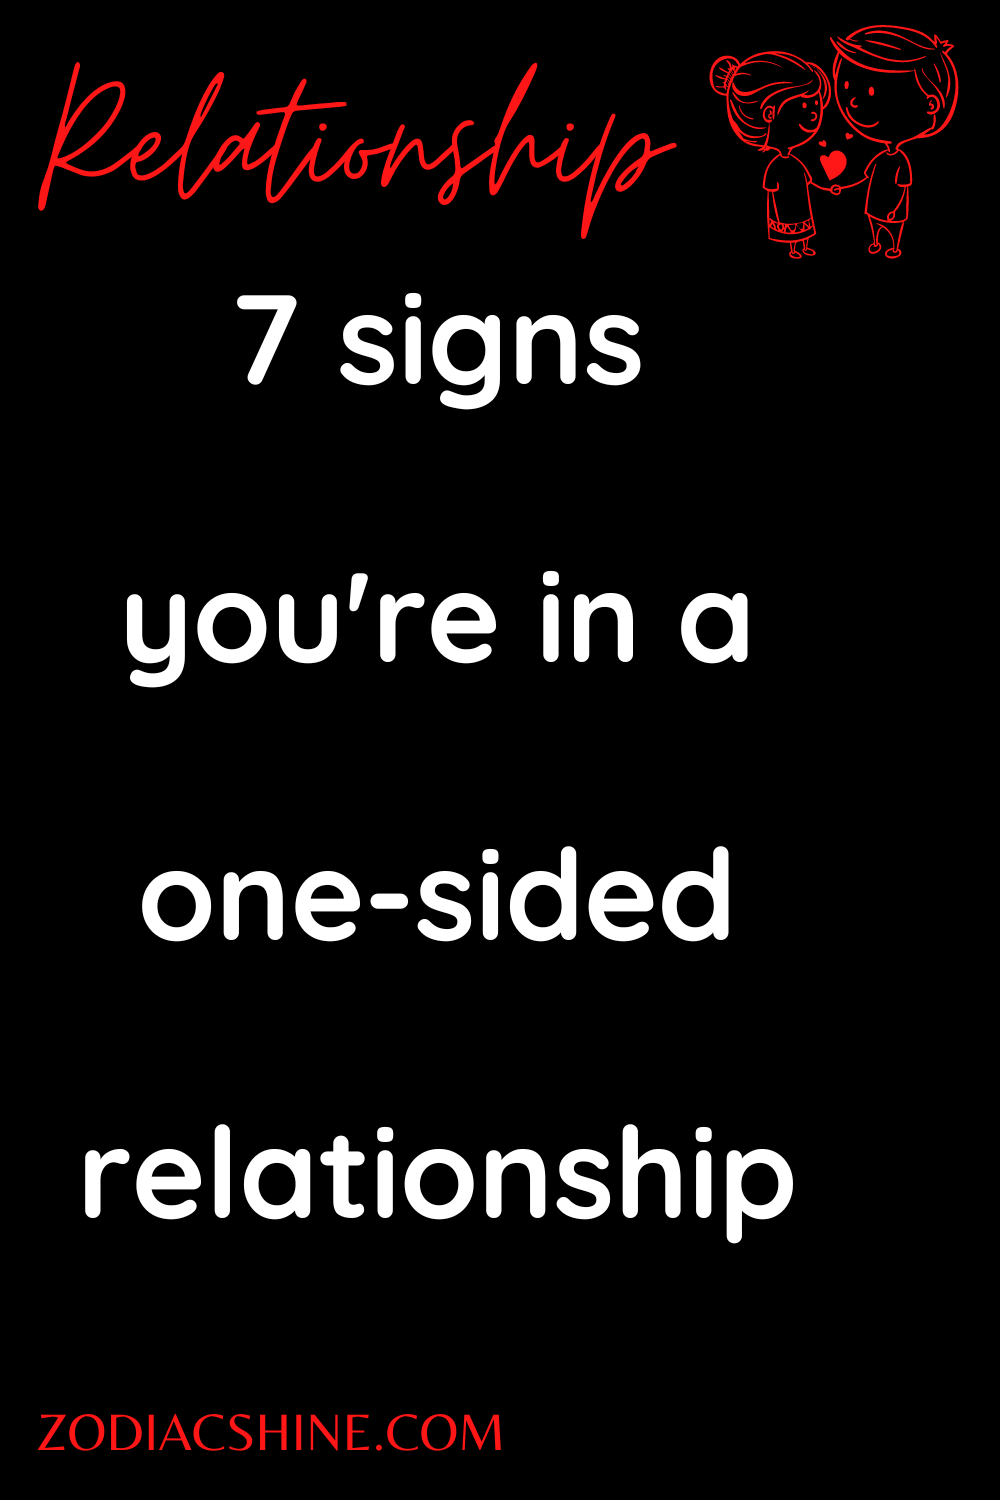 7 signs you're in a one-sided relationship